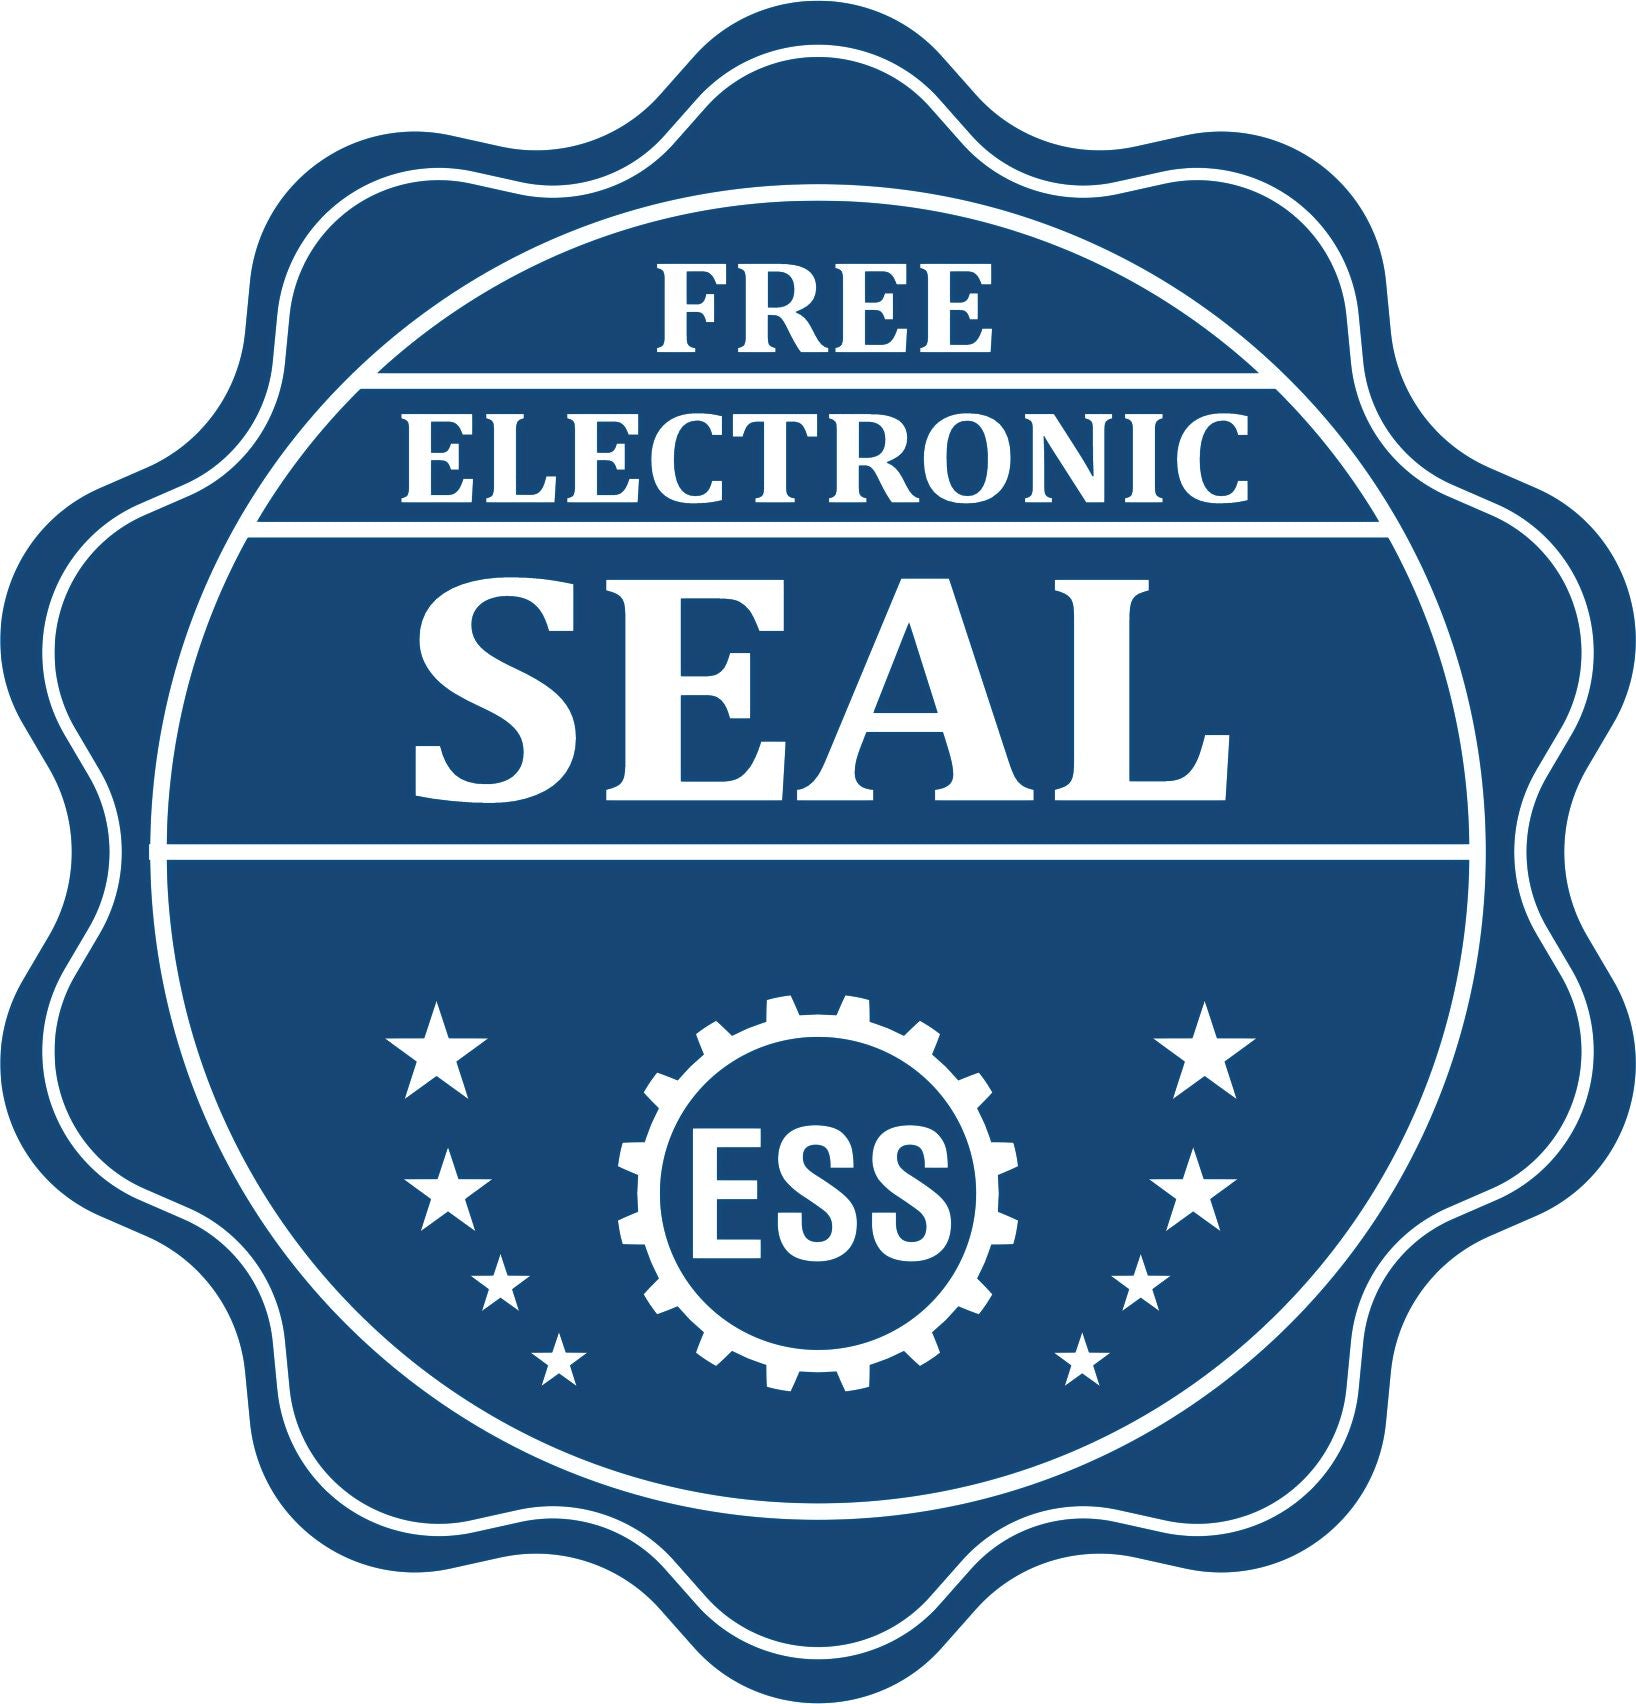 A badge showing a free electronic seal for the Slim Pre-Inked Alabama Professional Engineer Seal Stamp with stars and the ESS gear on the emblem.